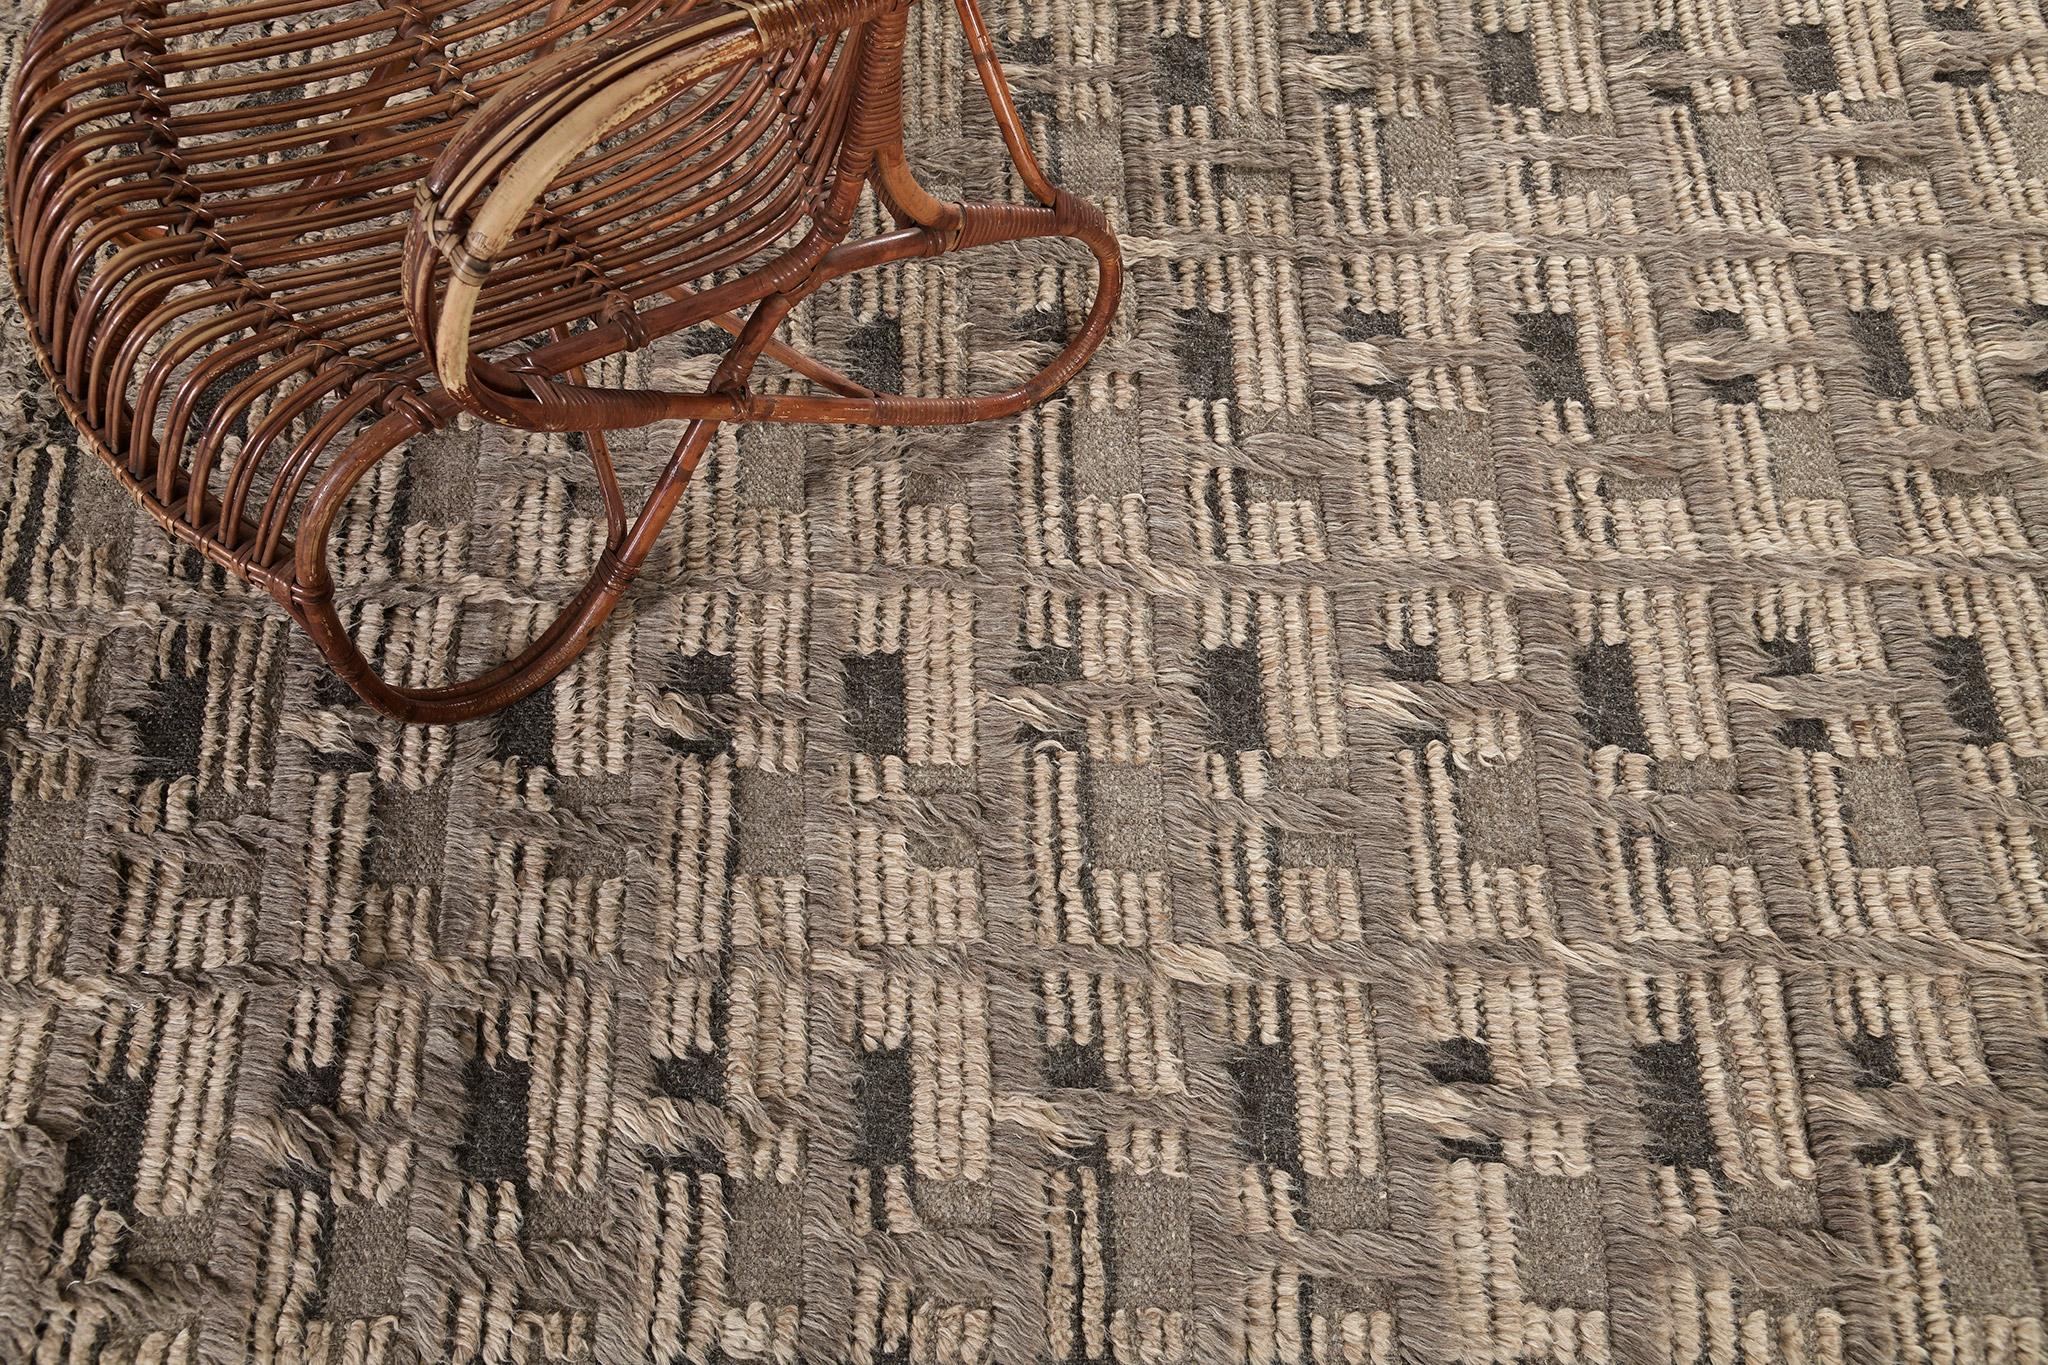 Imana is an intricate syncopated motif of long and short pile punctuated by squares of open flatweave in banded tones. Imana is available in two colorways, with custom options available. This piece features colors of mulled cacao on a striped